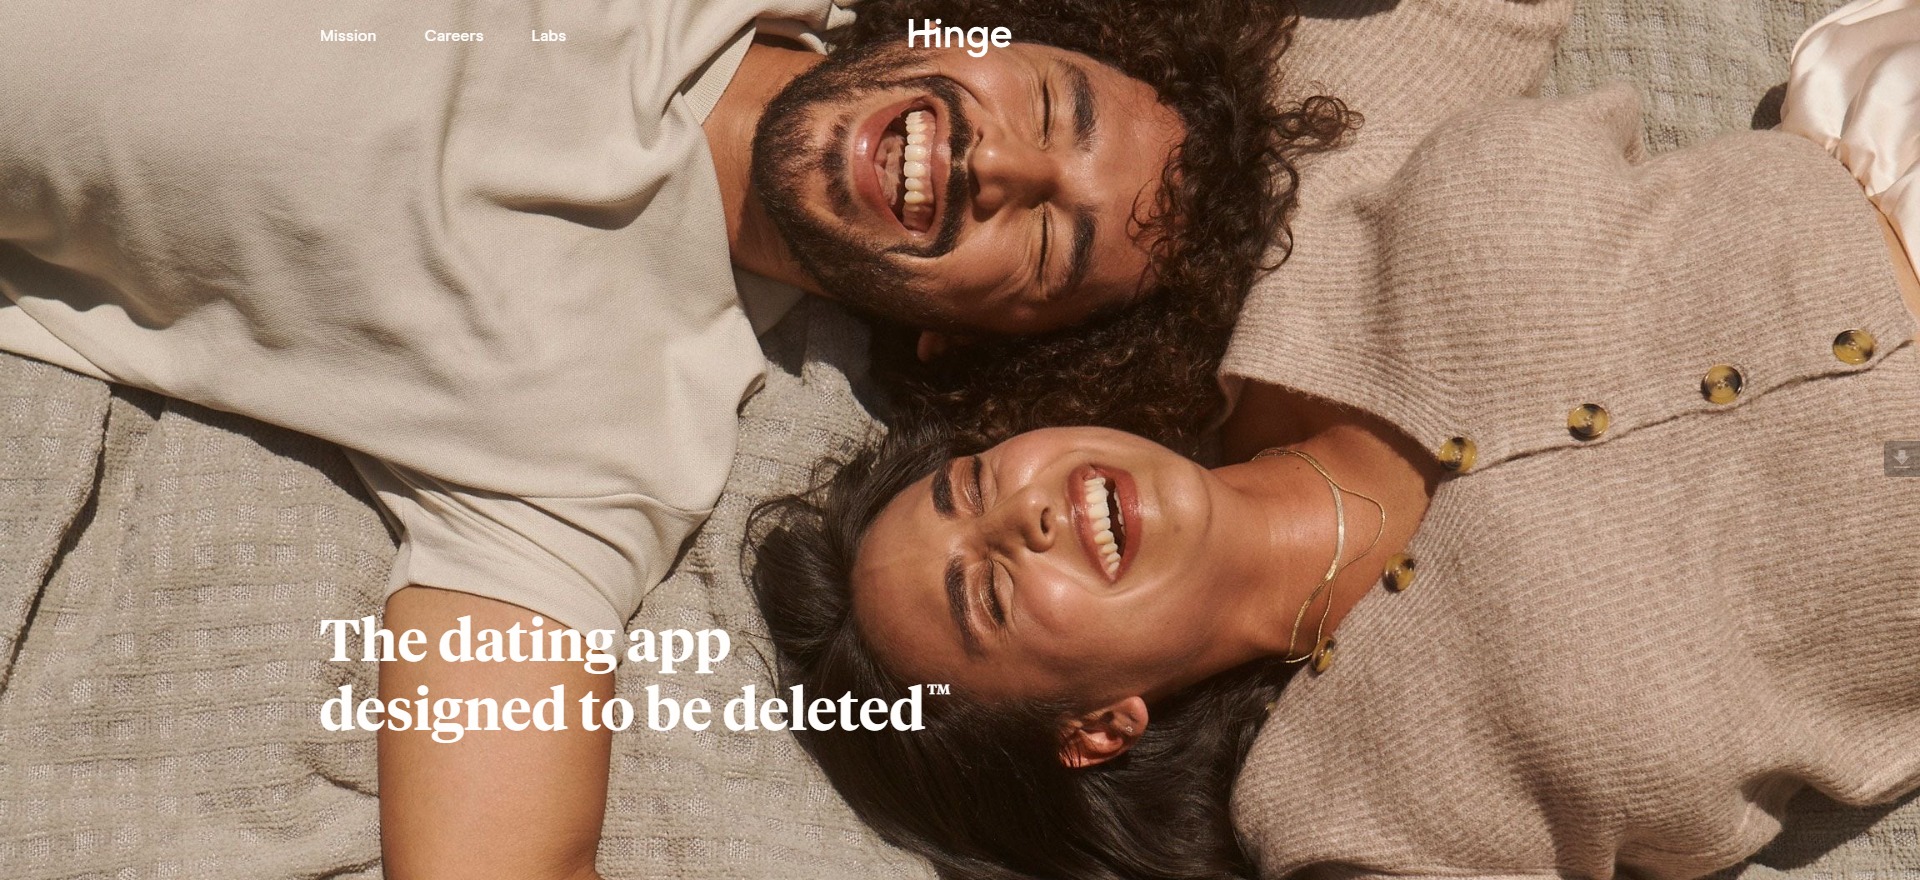 Hinge: Everything You Need to Know